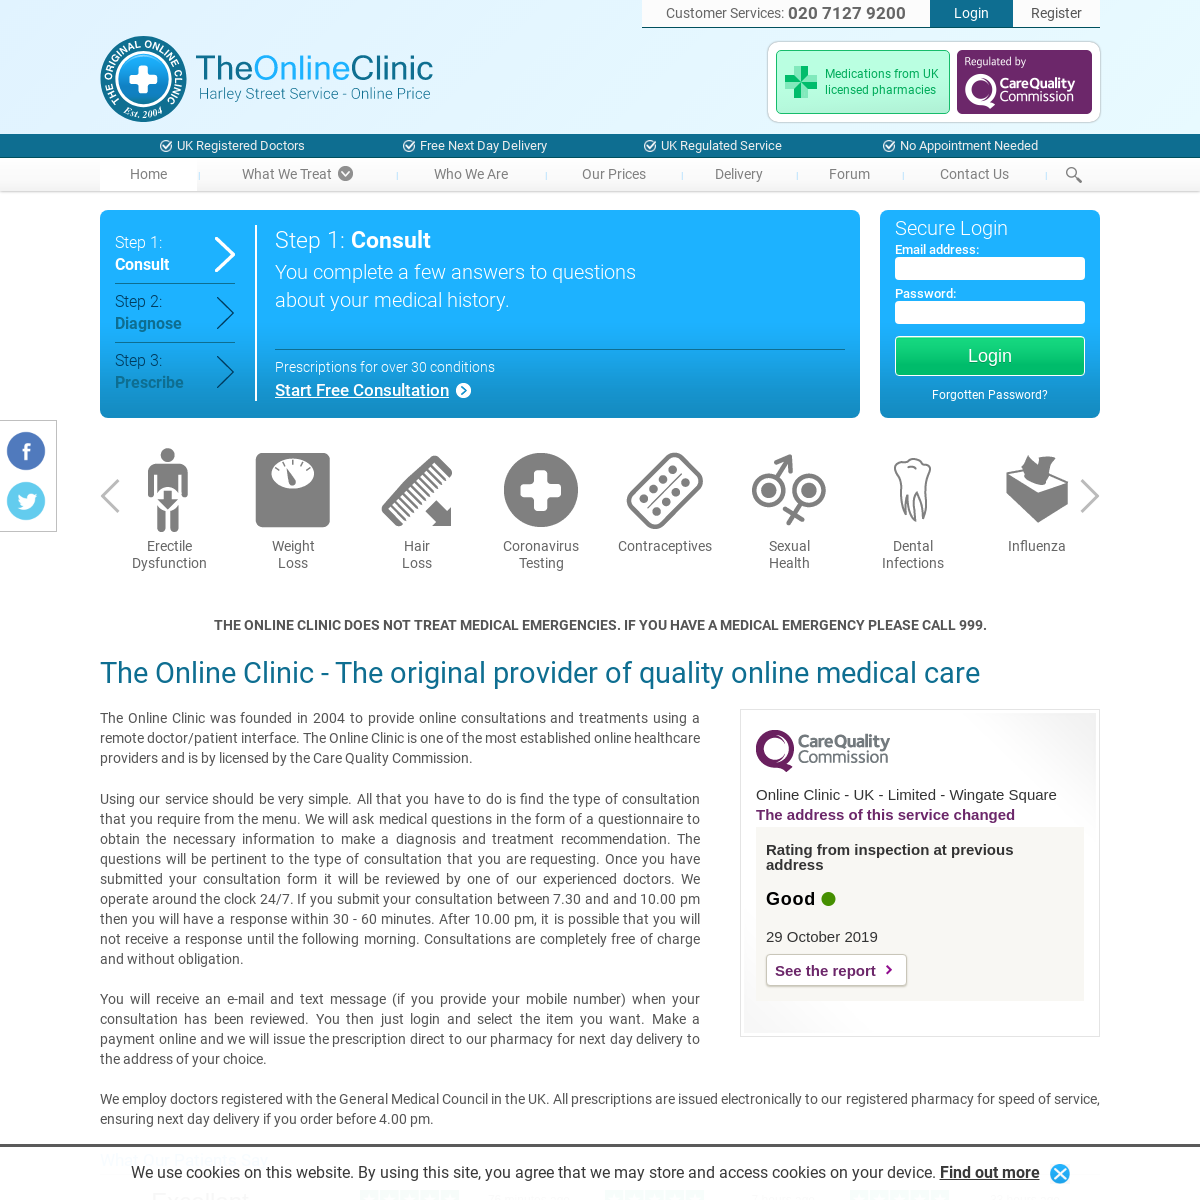 A complete backup of theonlineclinic.co.uk